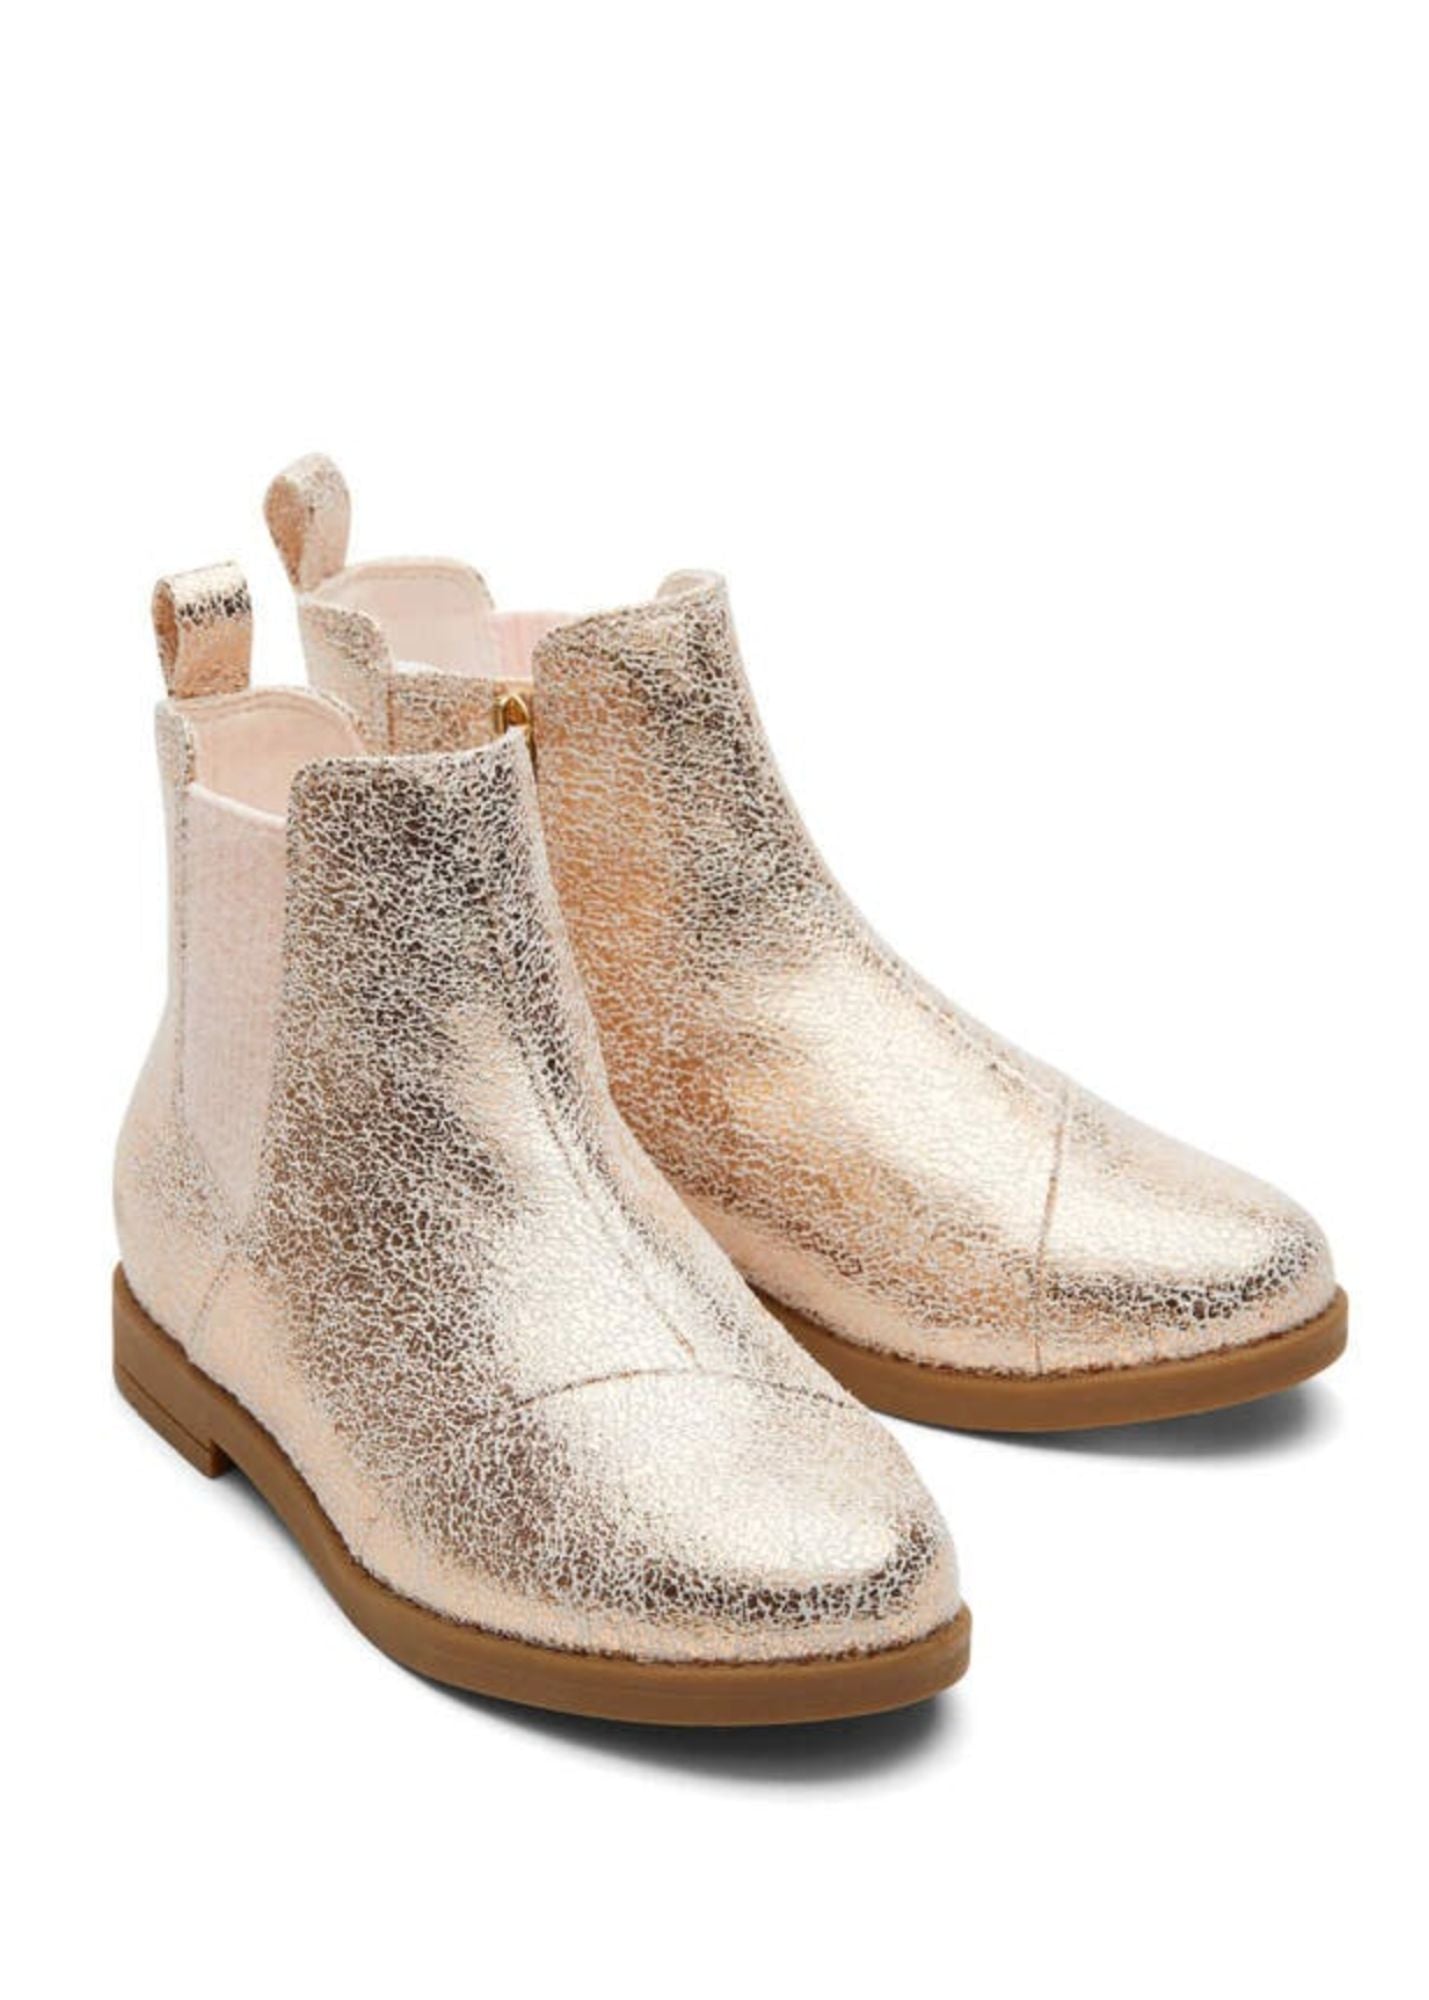 TOMS® Charlie Youth Bootie Shoes